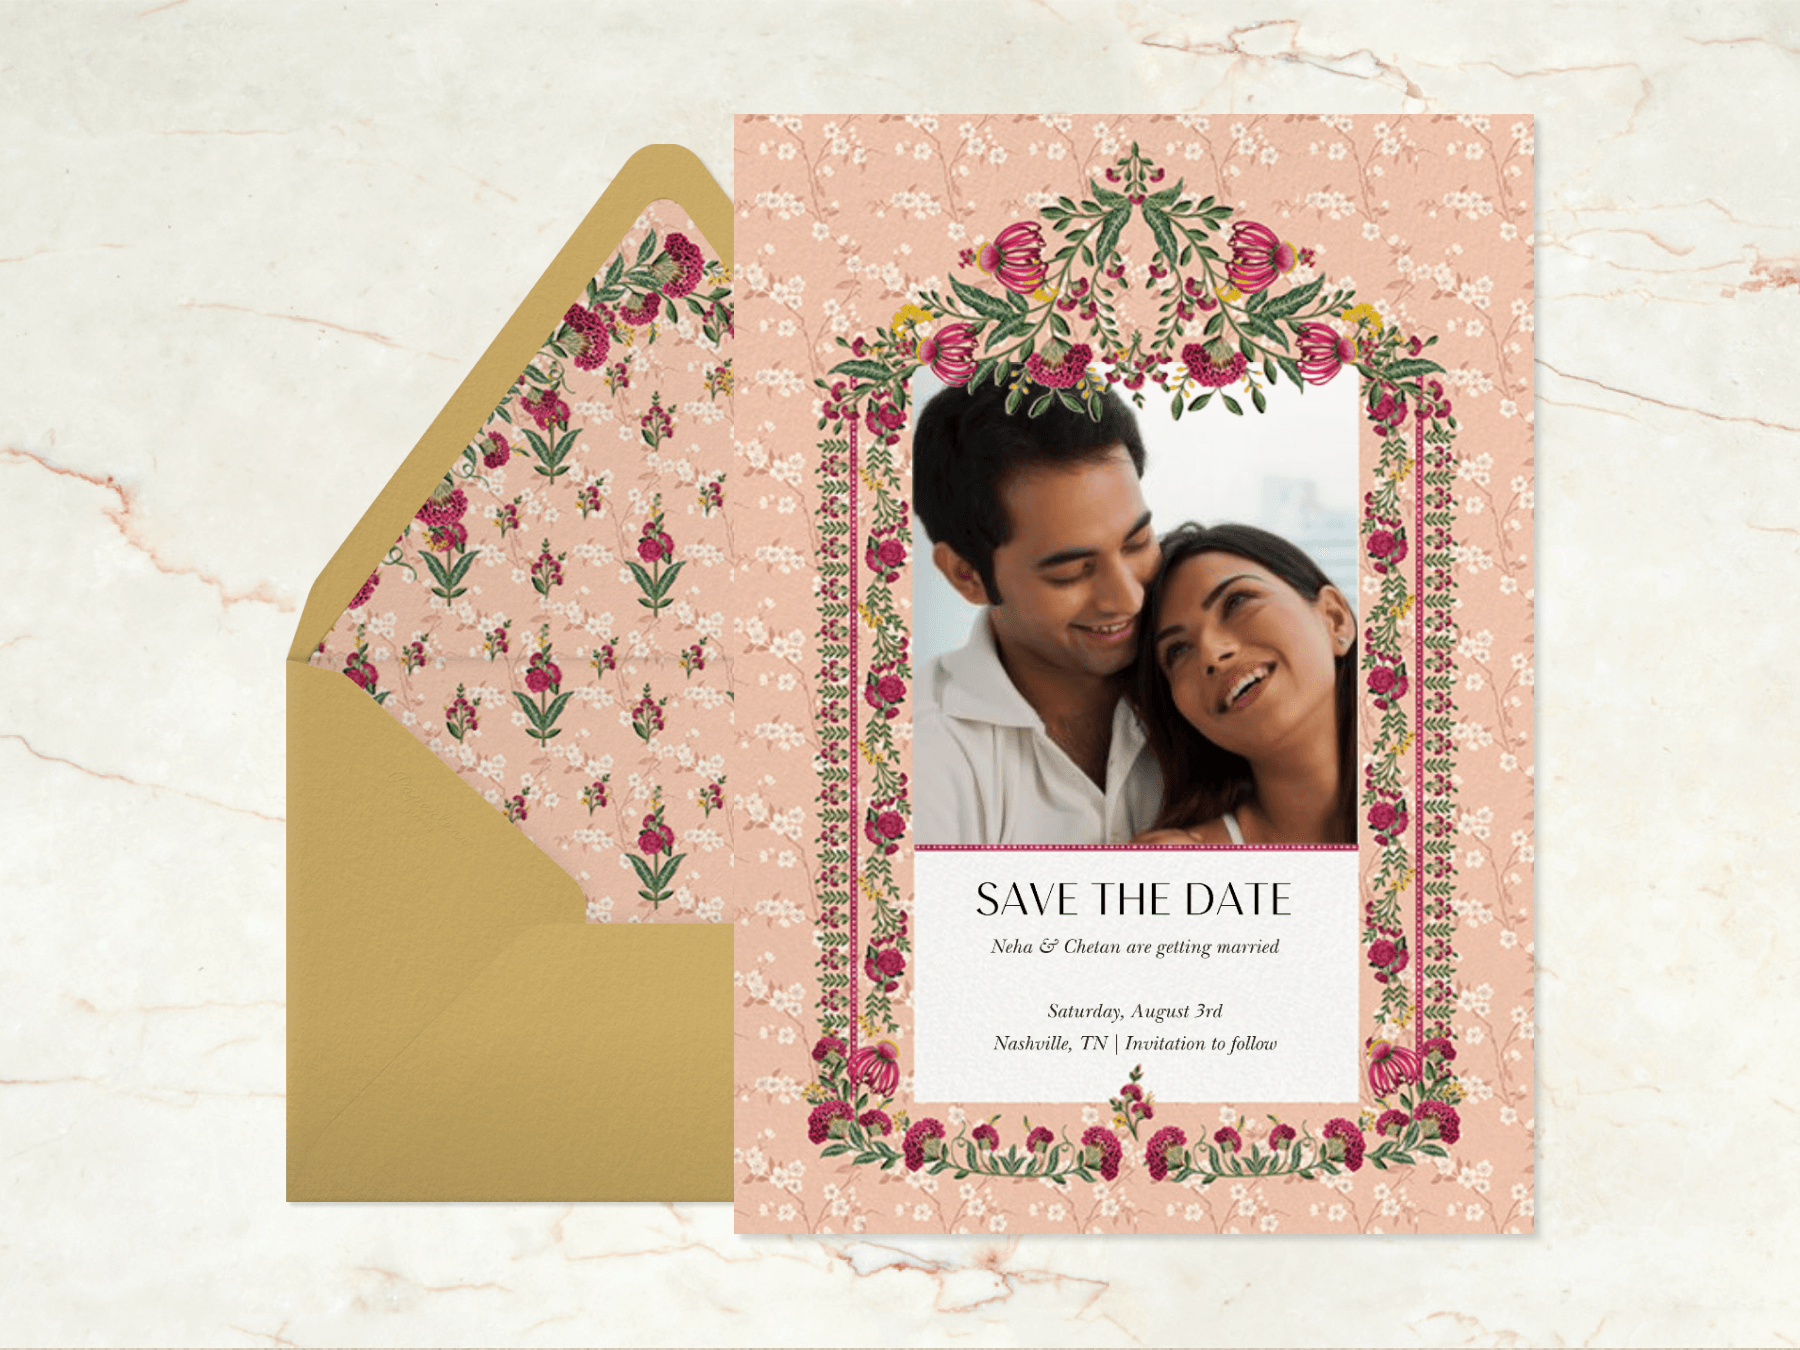 A light pink wedding invitation with a photo of a couple surrounded by a fuchsia, green, and yellow floral border next to a gold envelope with matching liner on a marble background.